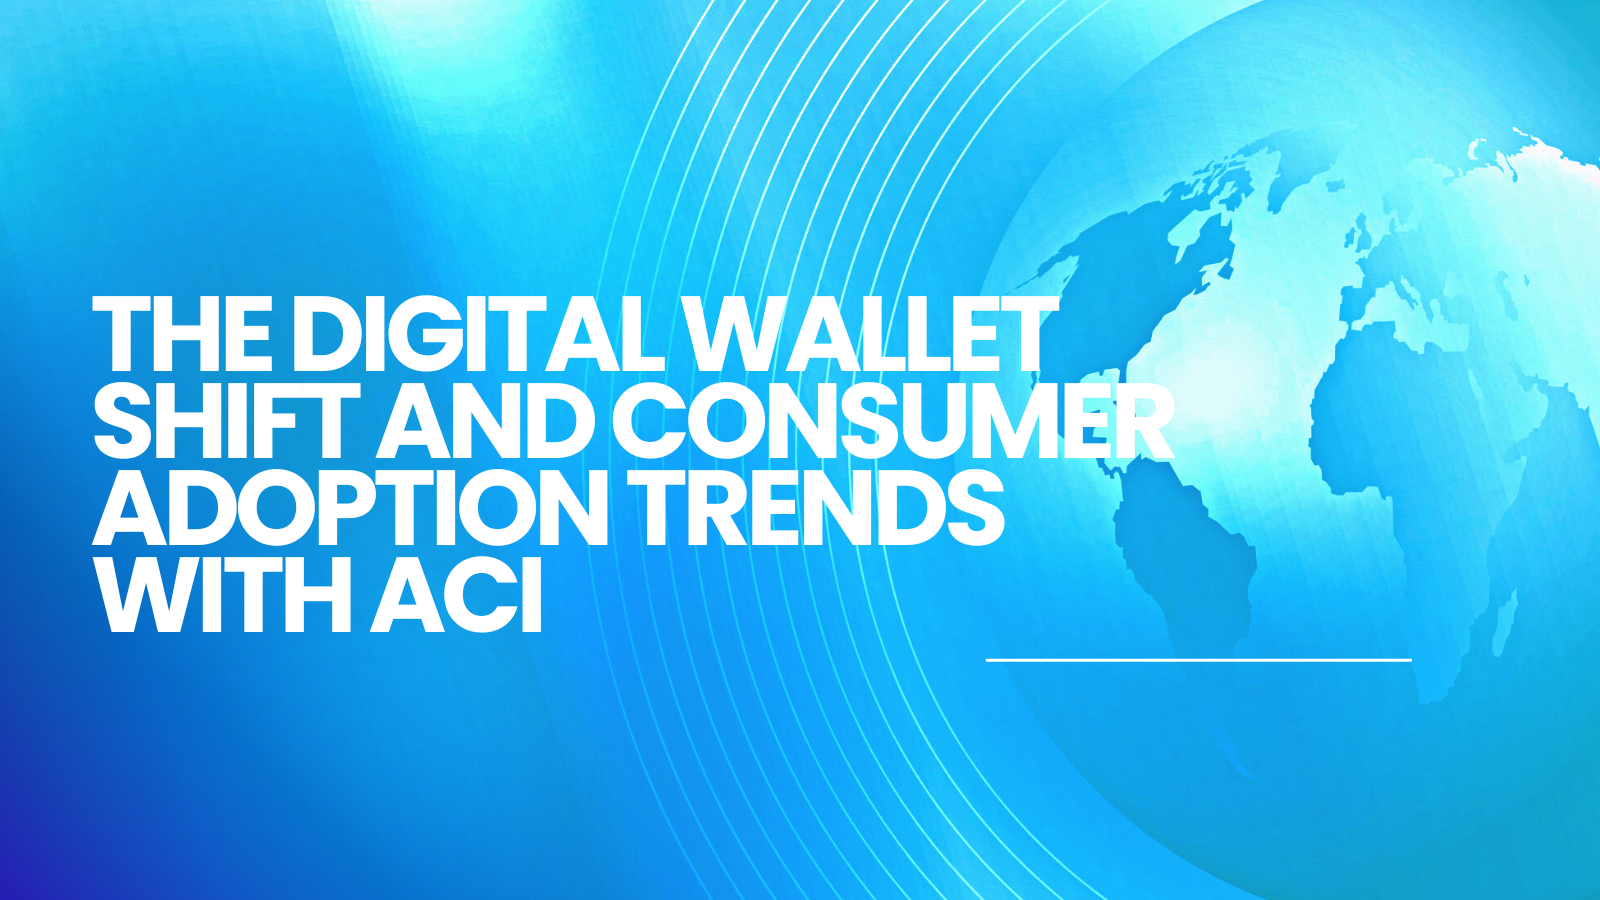 The Digital Wallet Shift and Consumer Adoption Trends with ACI